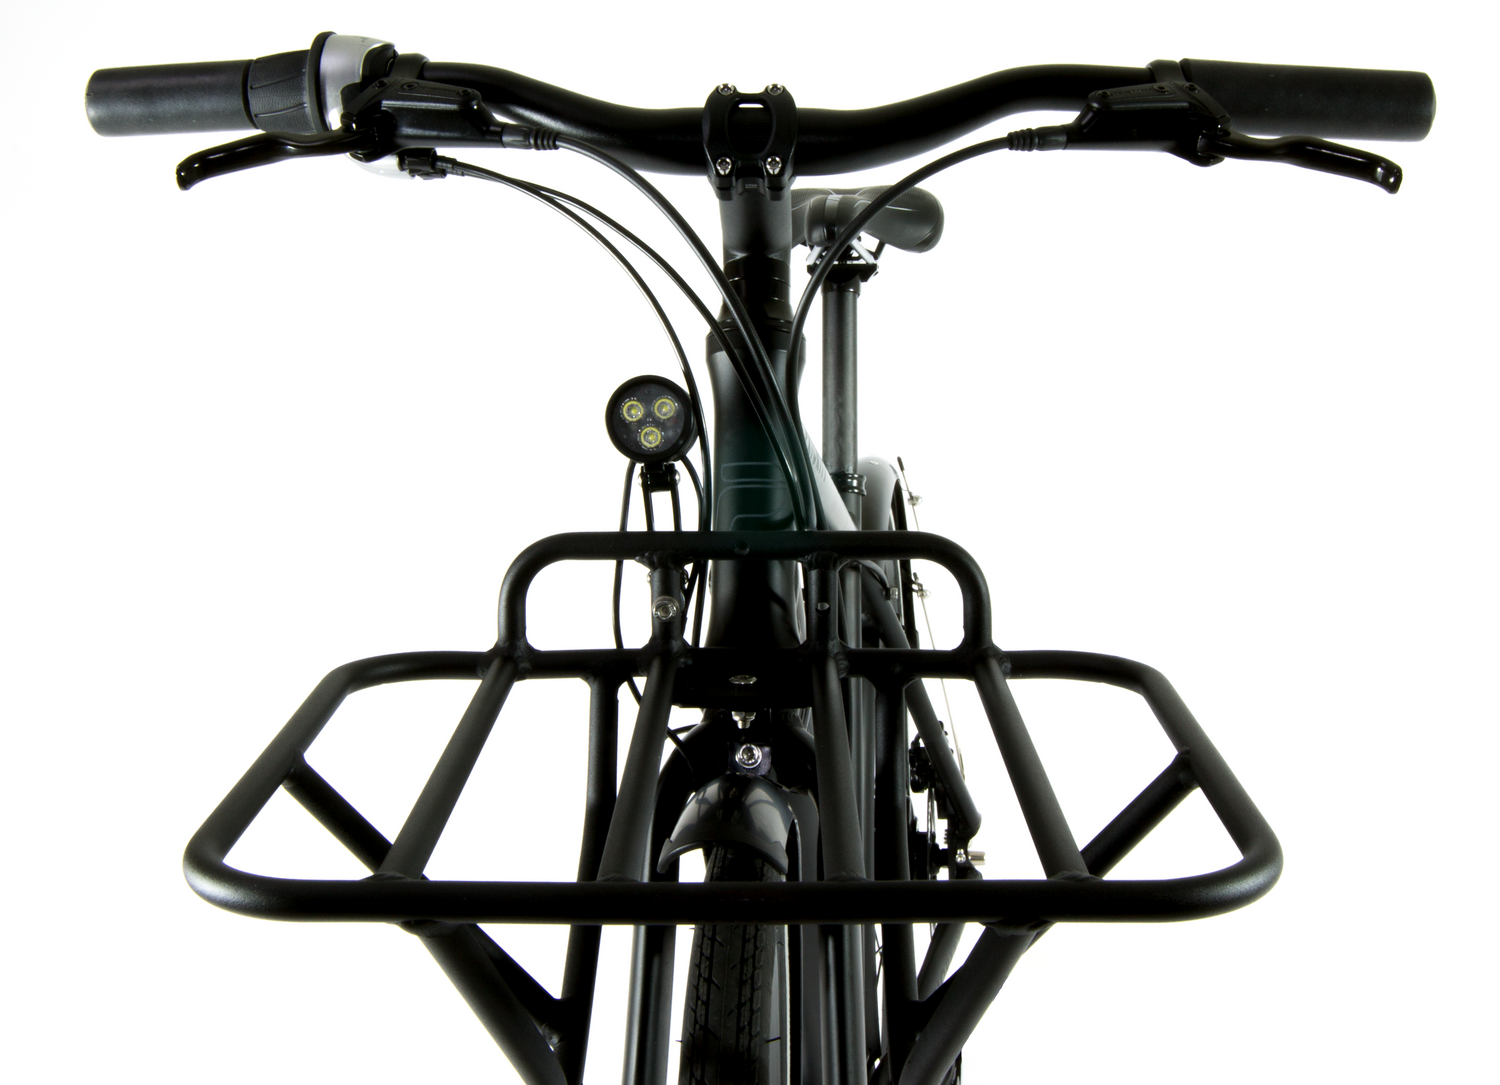 Priority Front Porteur Rack holding a large bag